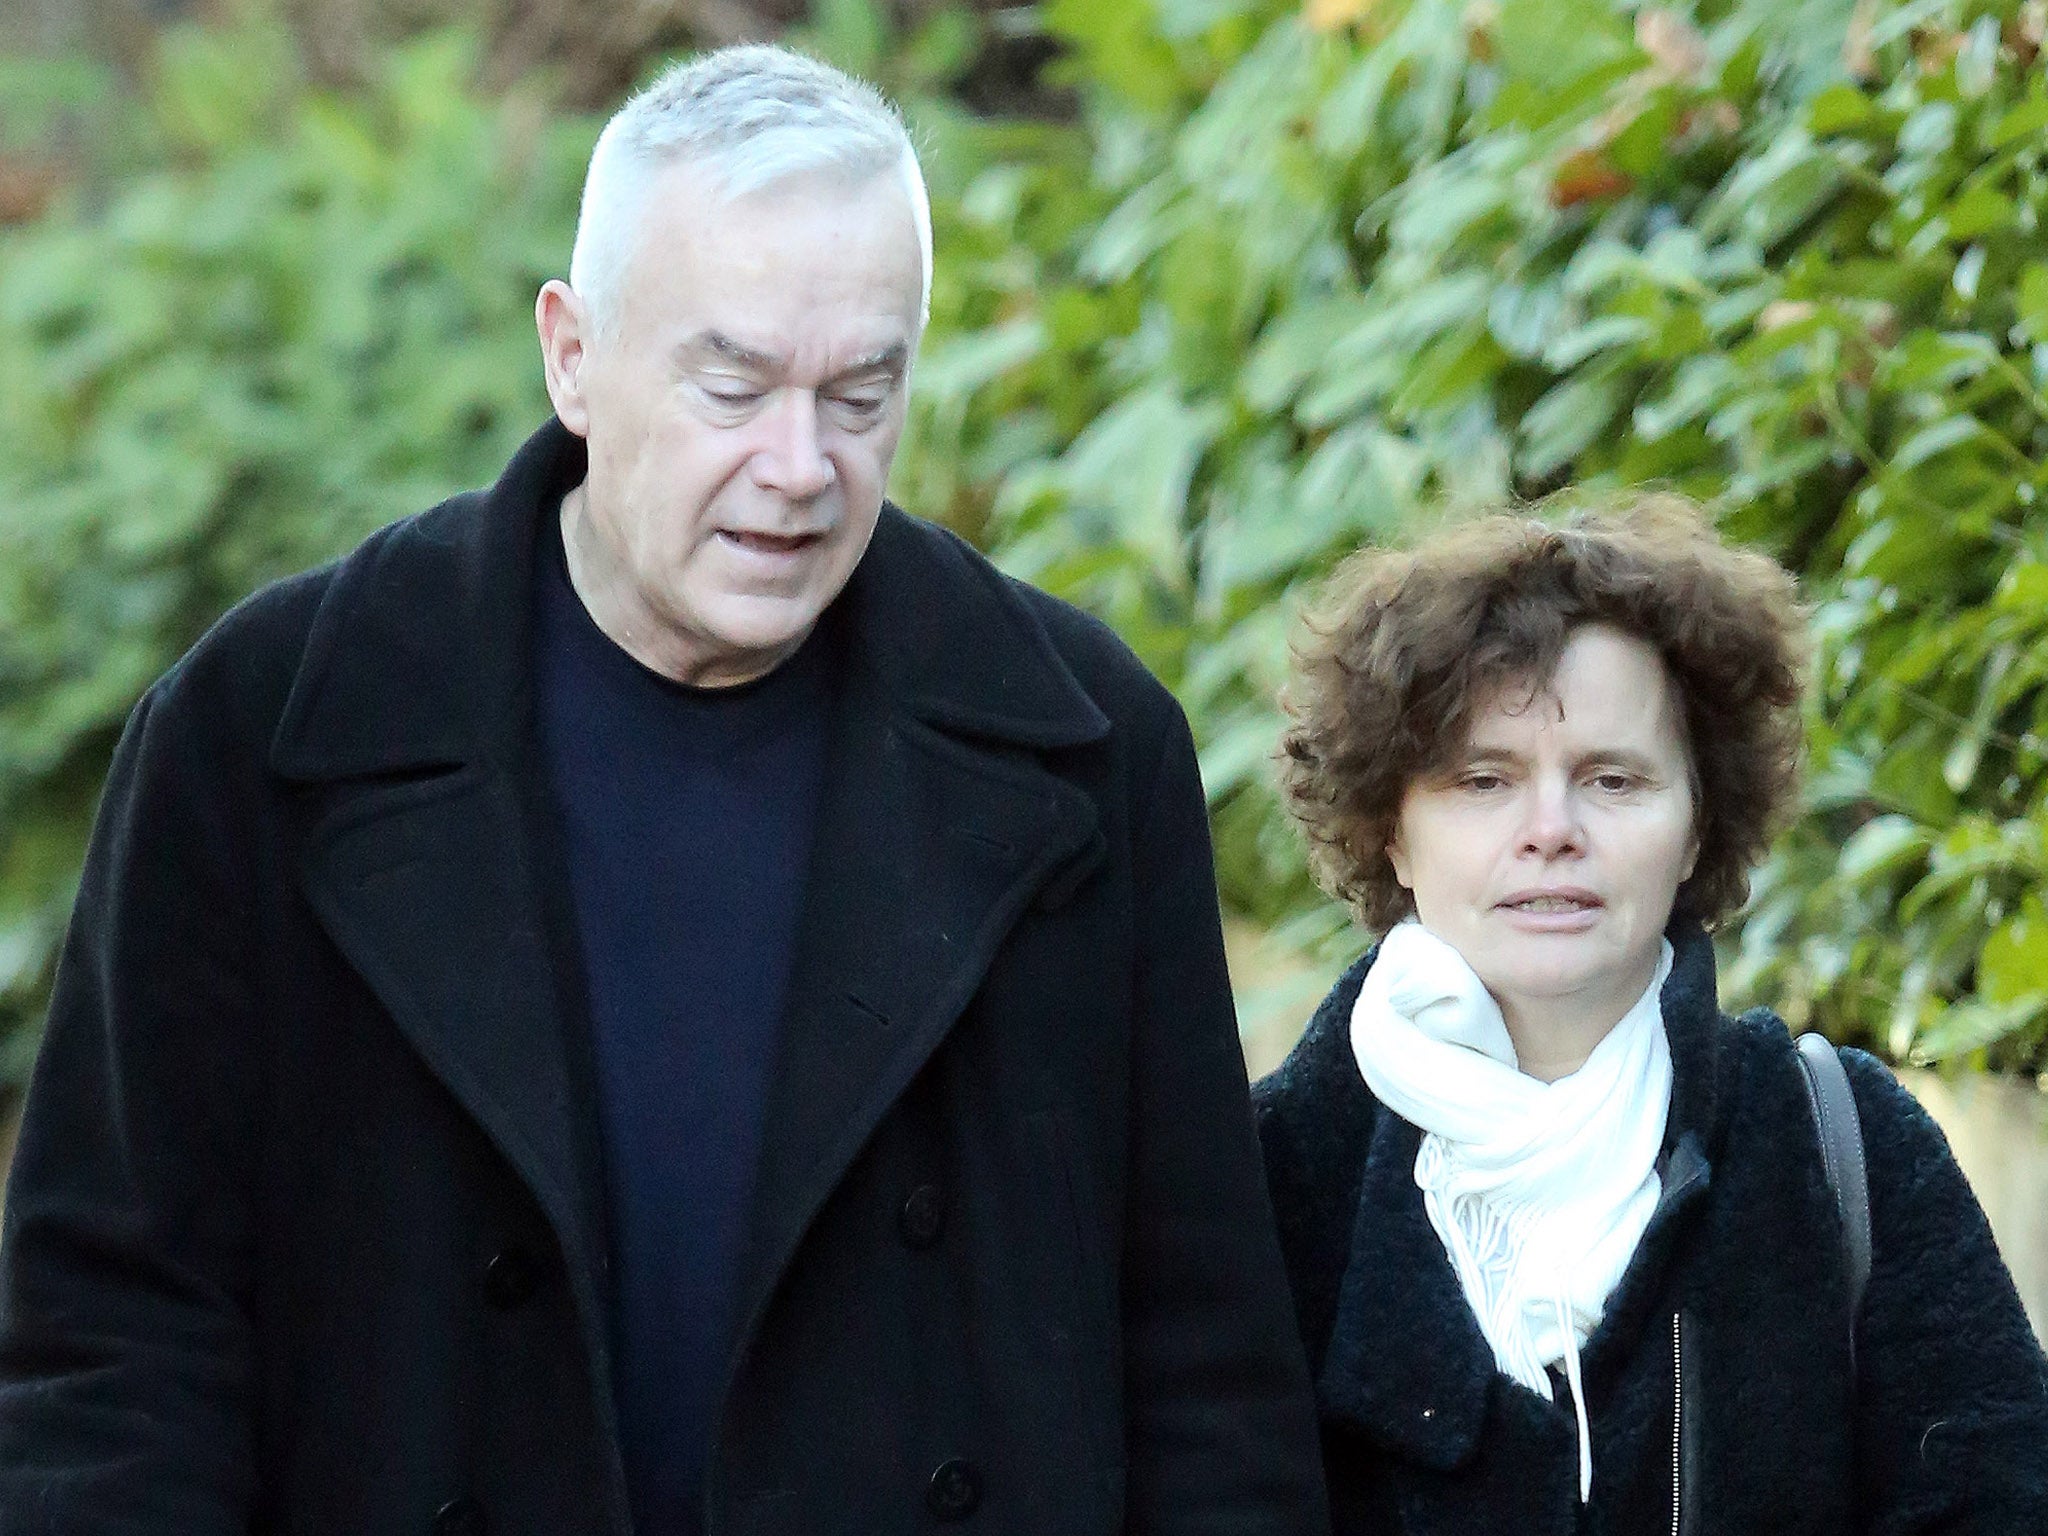 Huw Edwards in hospital as he is named in BBC sex scandal The Independent photo